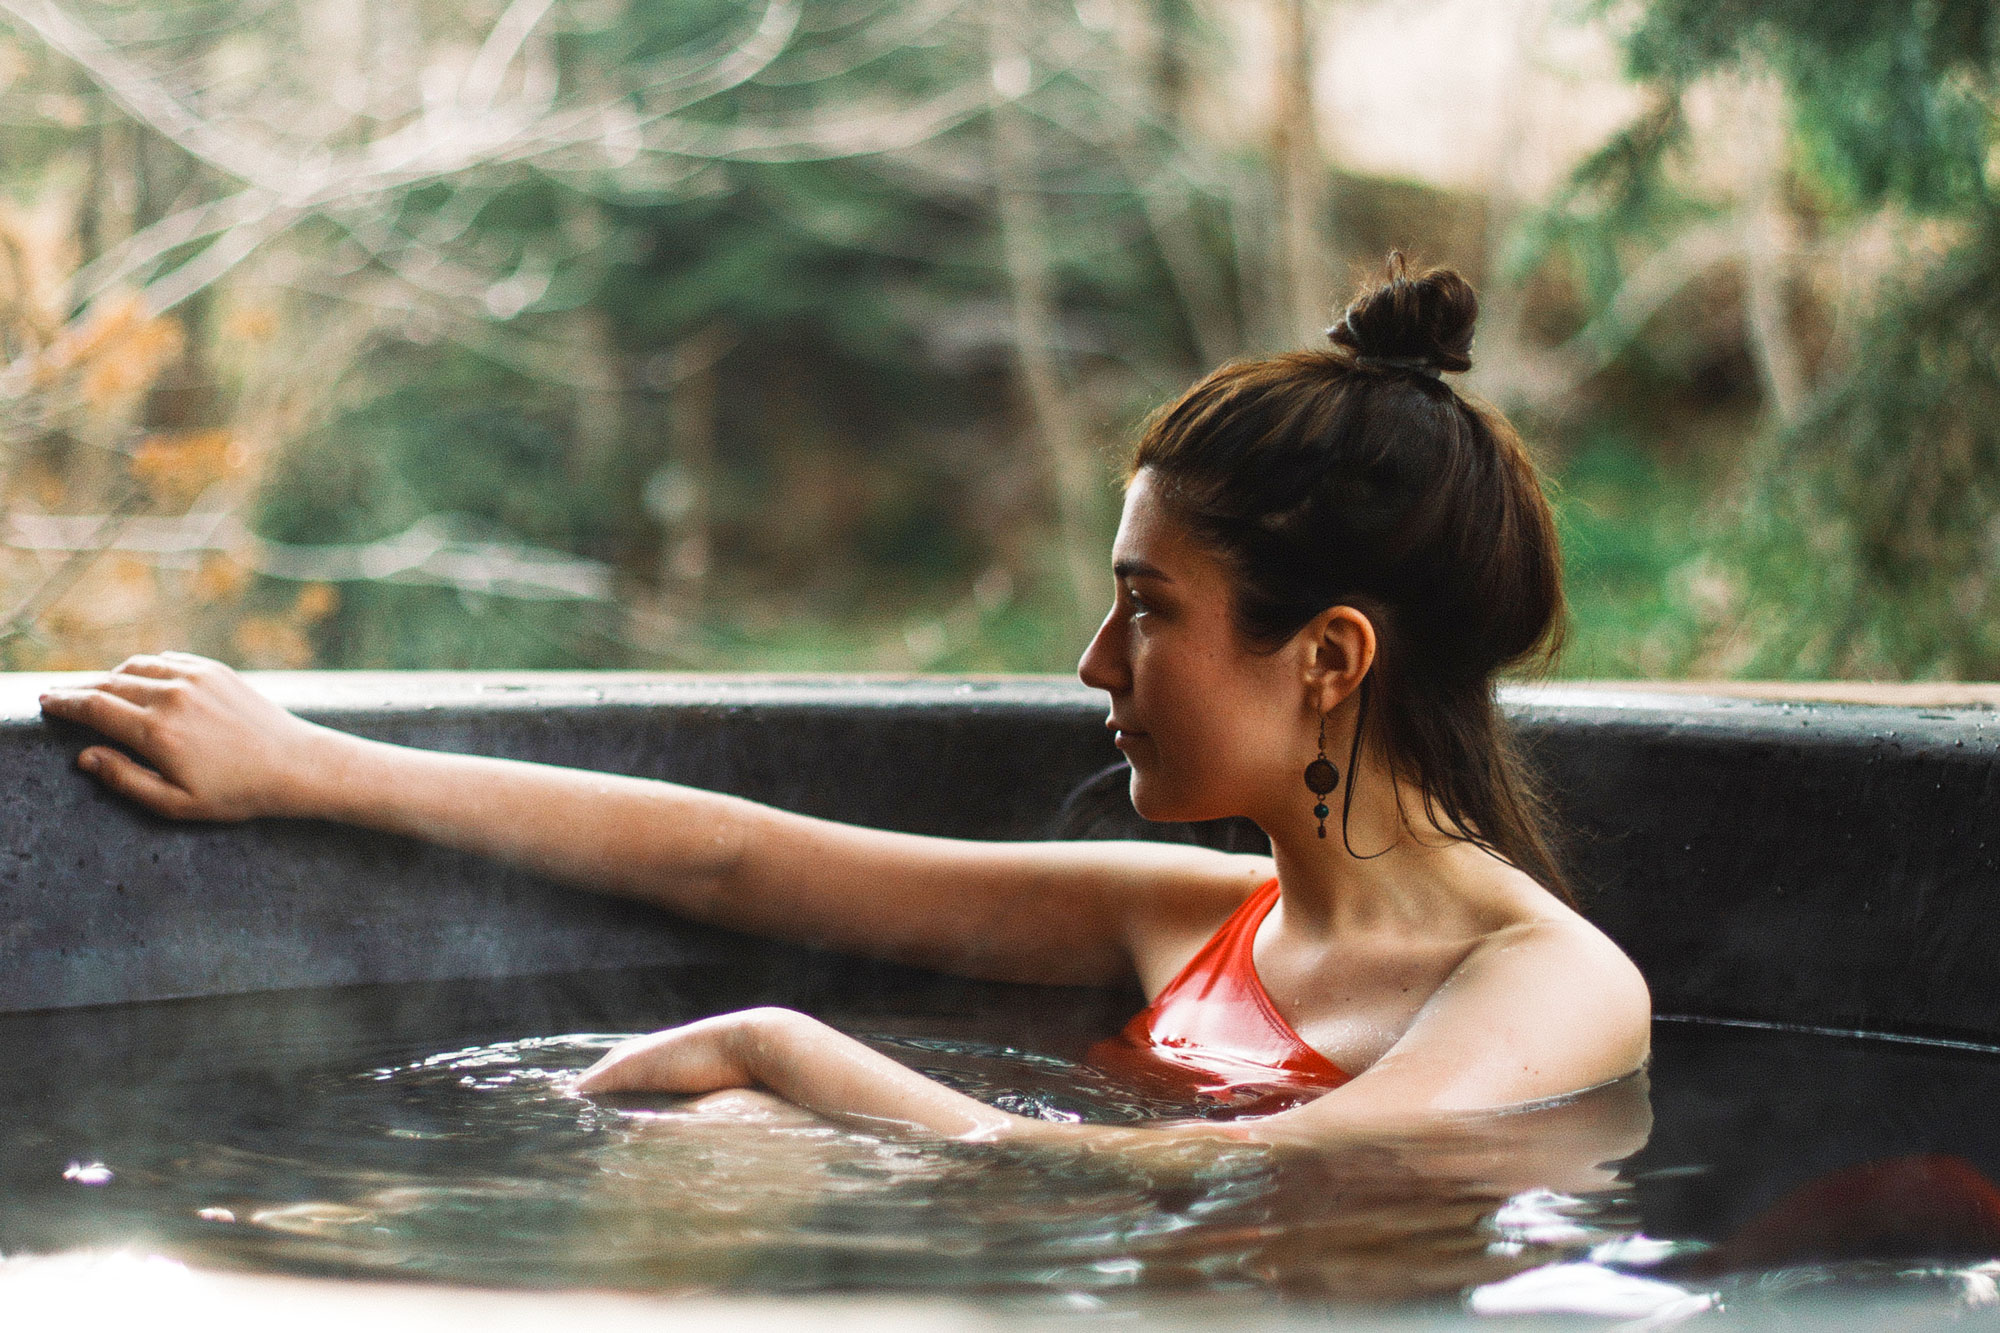 Girl in red relaxes in hot tub, savoring a serene and tranquil moment.